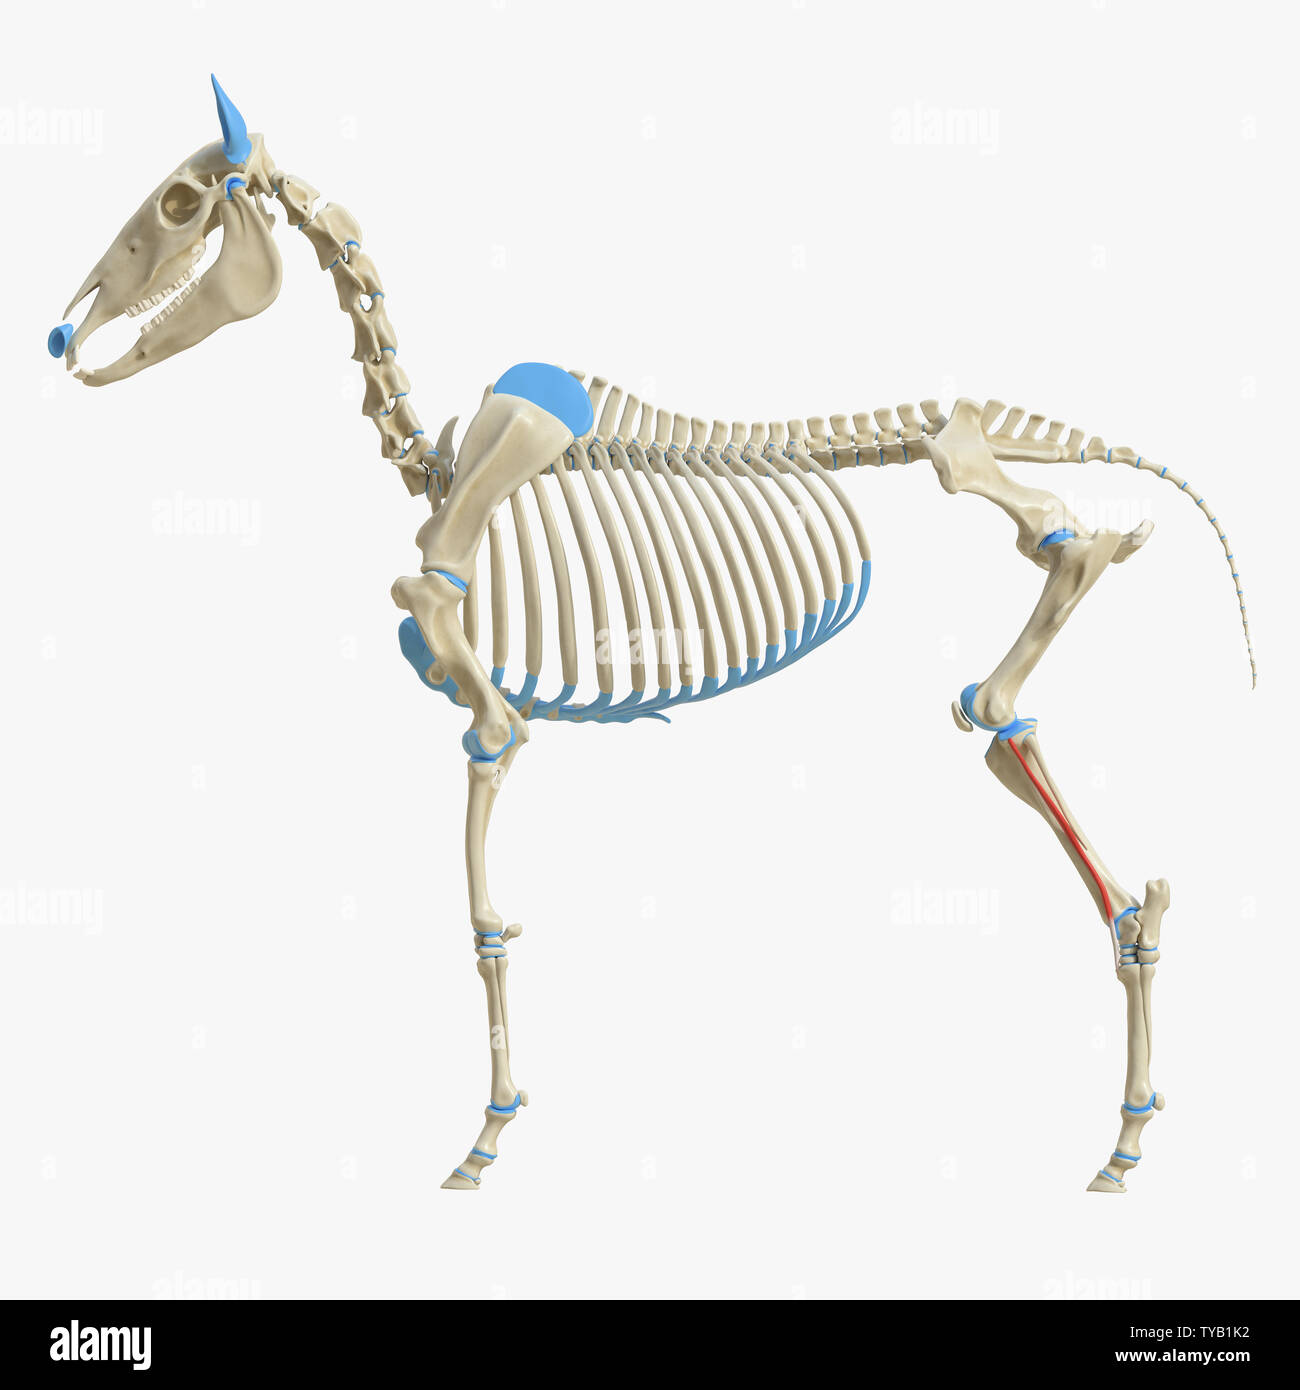 3d rendered medically accurate illustration of the equine muscle anatomy - Peroneus Tertius Stock Photo